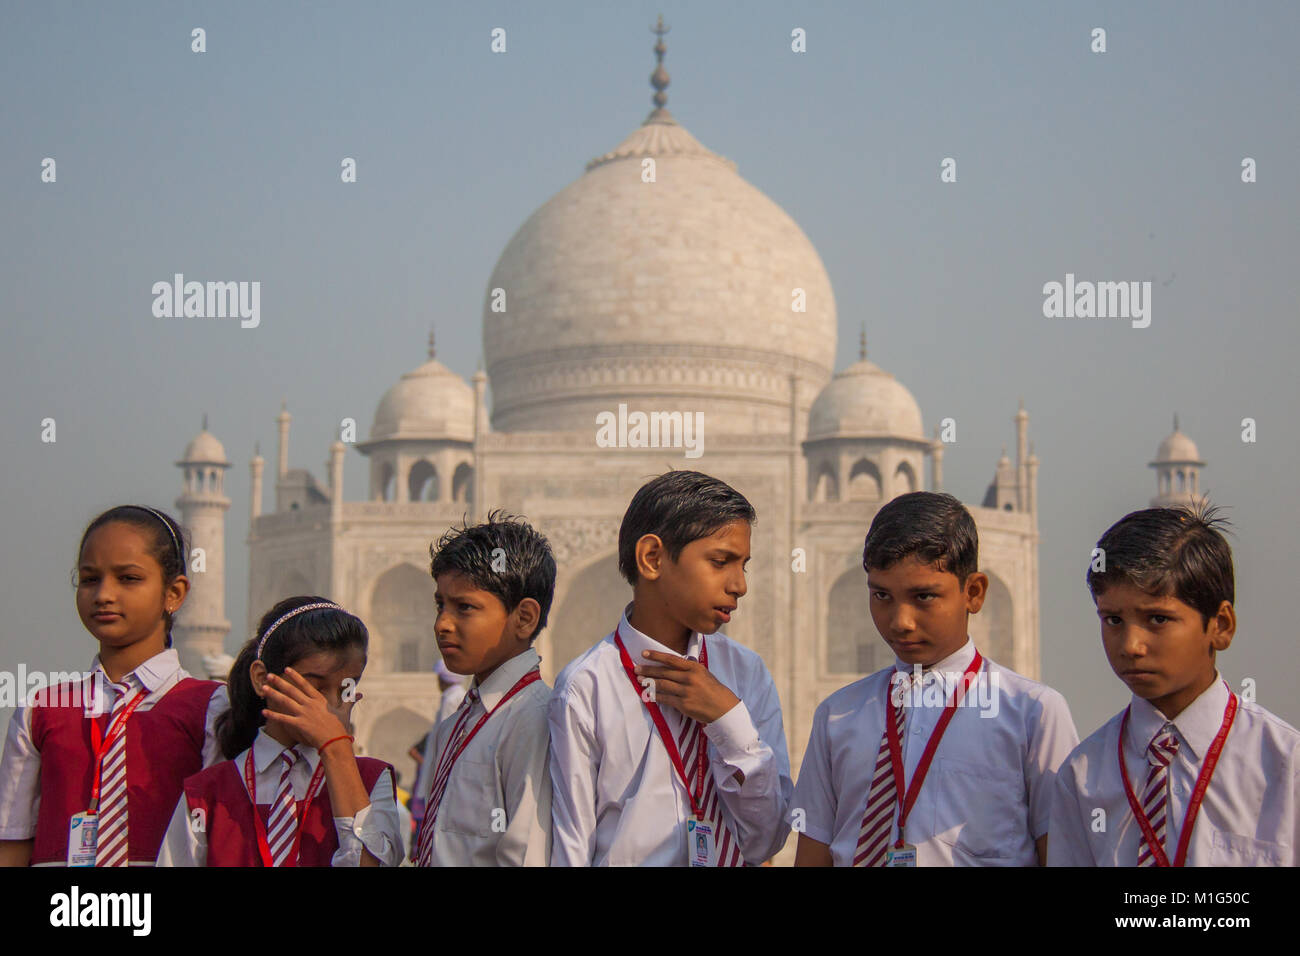 Indian school children looking bored and fed up at a trip to the Taj Mahal in Agra, Utter Pradesh, India, in red and white school uniforms Stock Photo